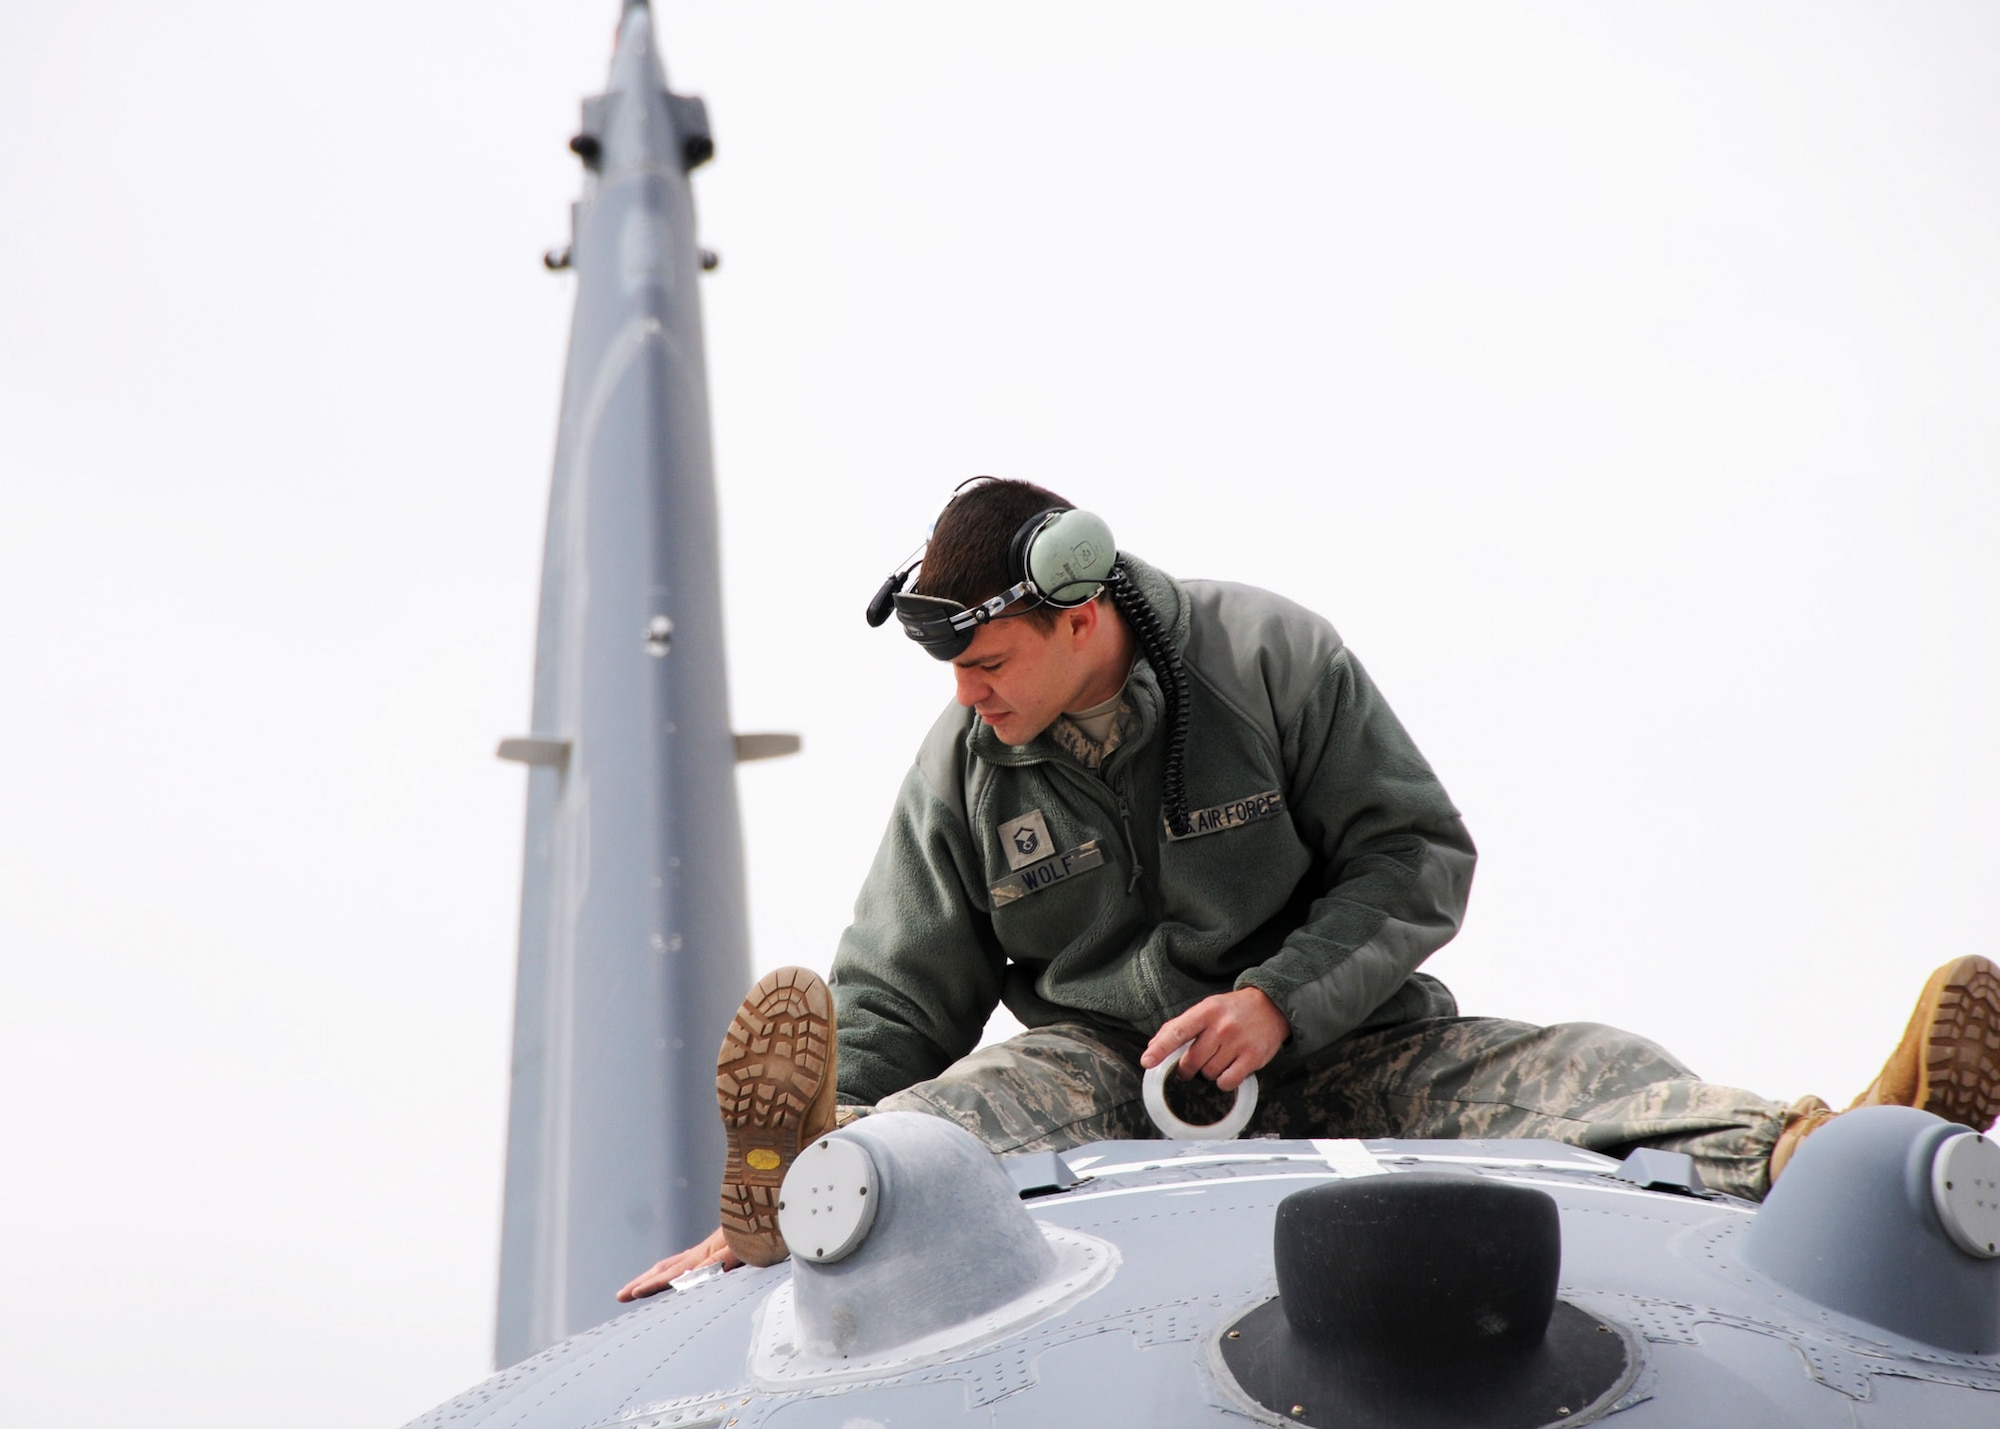 Master Sgt. Kris Wolf, 179th Maintenance Group, applies tape to the top a MC-130E Combat Talon May 5 at Gowen Field, Idaho.  919th, along with the 179th were sent to Boise, Idaho, to prepare four Talons to take off for one more mission – a flight into retirement and decommissioning.  Three of the Talons flew to Davis-Monthan Air Force Base, Ariz.  The other went to Hurlburt Field, Fla., to be placed in the Air Force Special Operations Command airpark.  (U.S. Air Force photo/Tech. Sgt. Samuel King Jr.)  